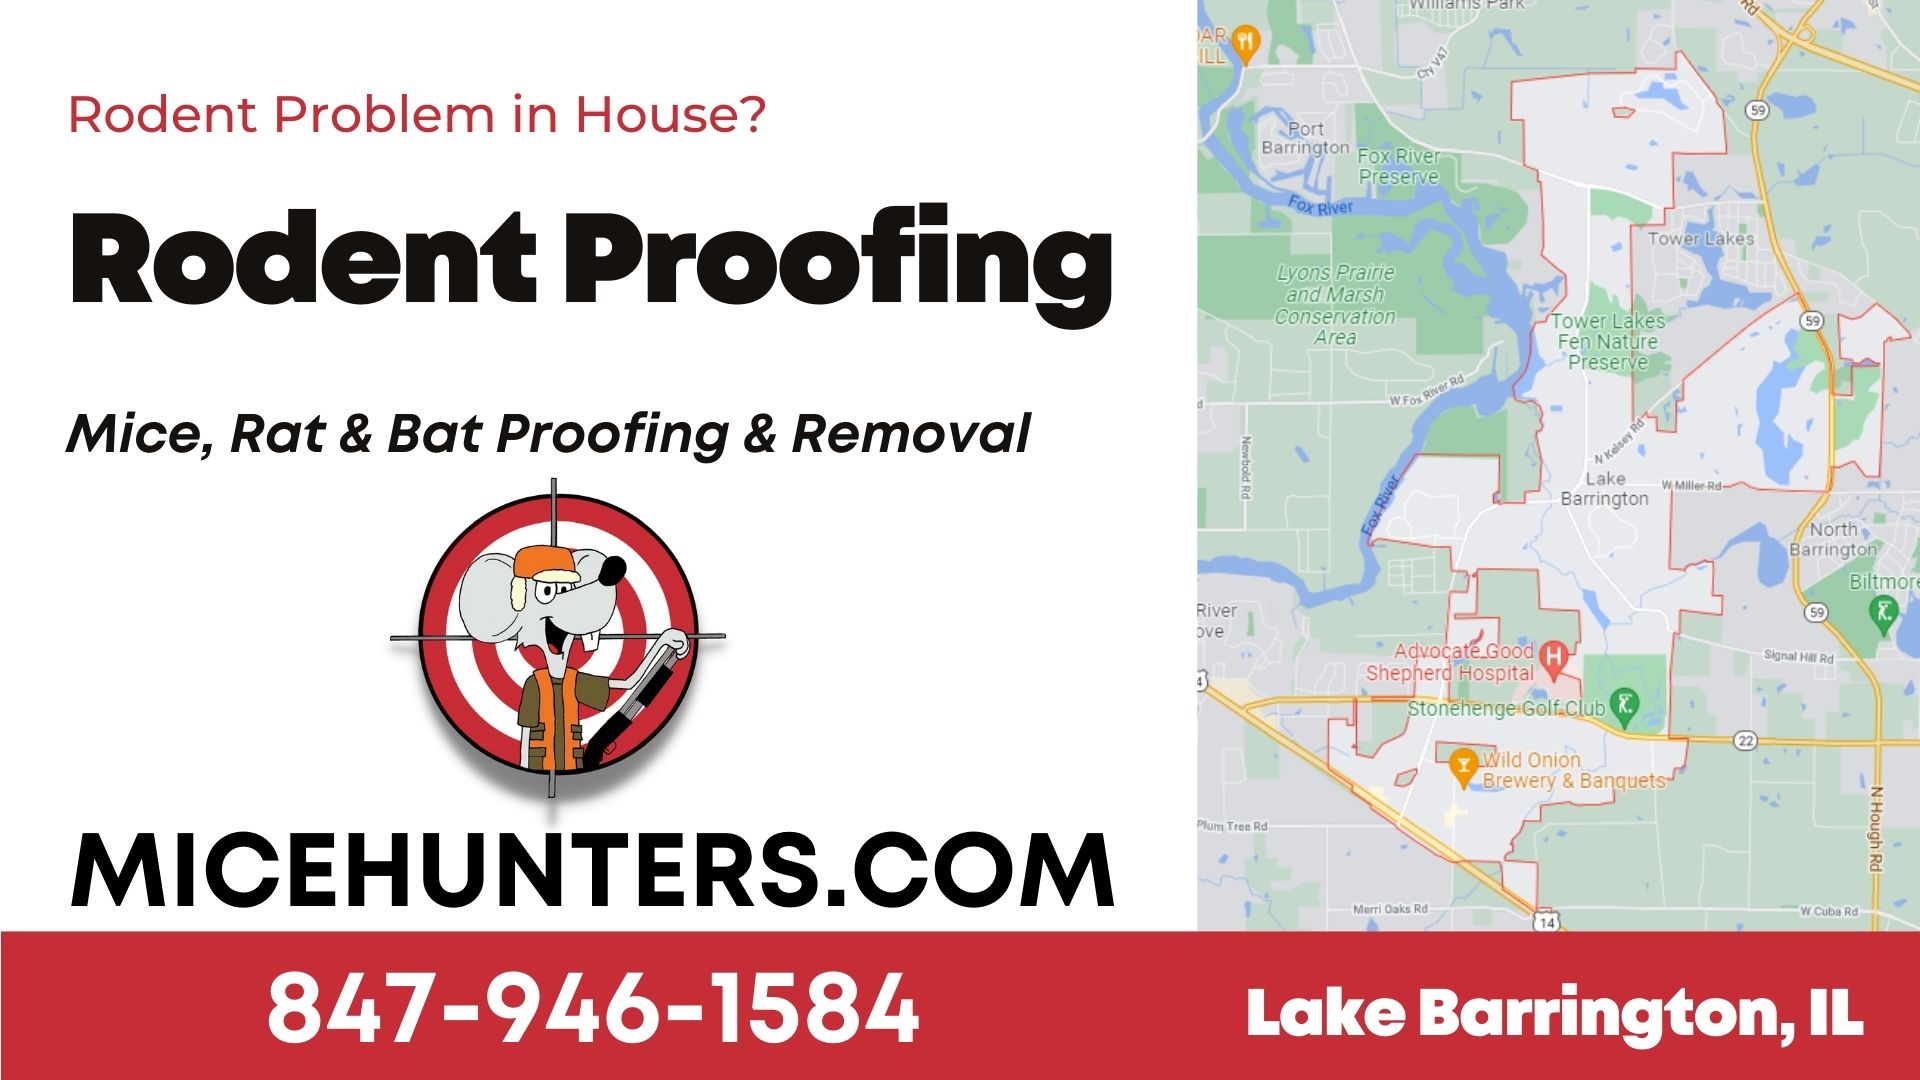 Lake Barrington Rodent and Mice Proofing Exterminator